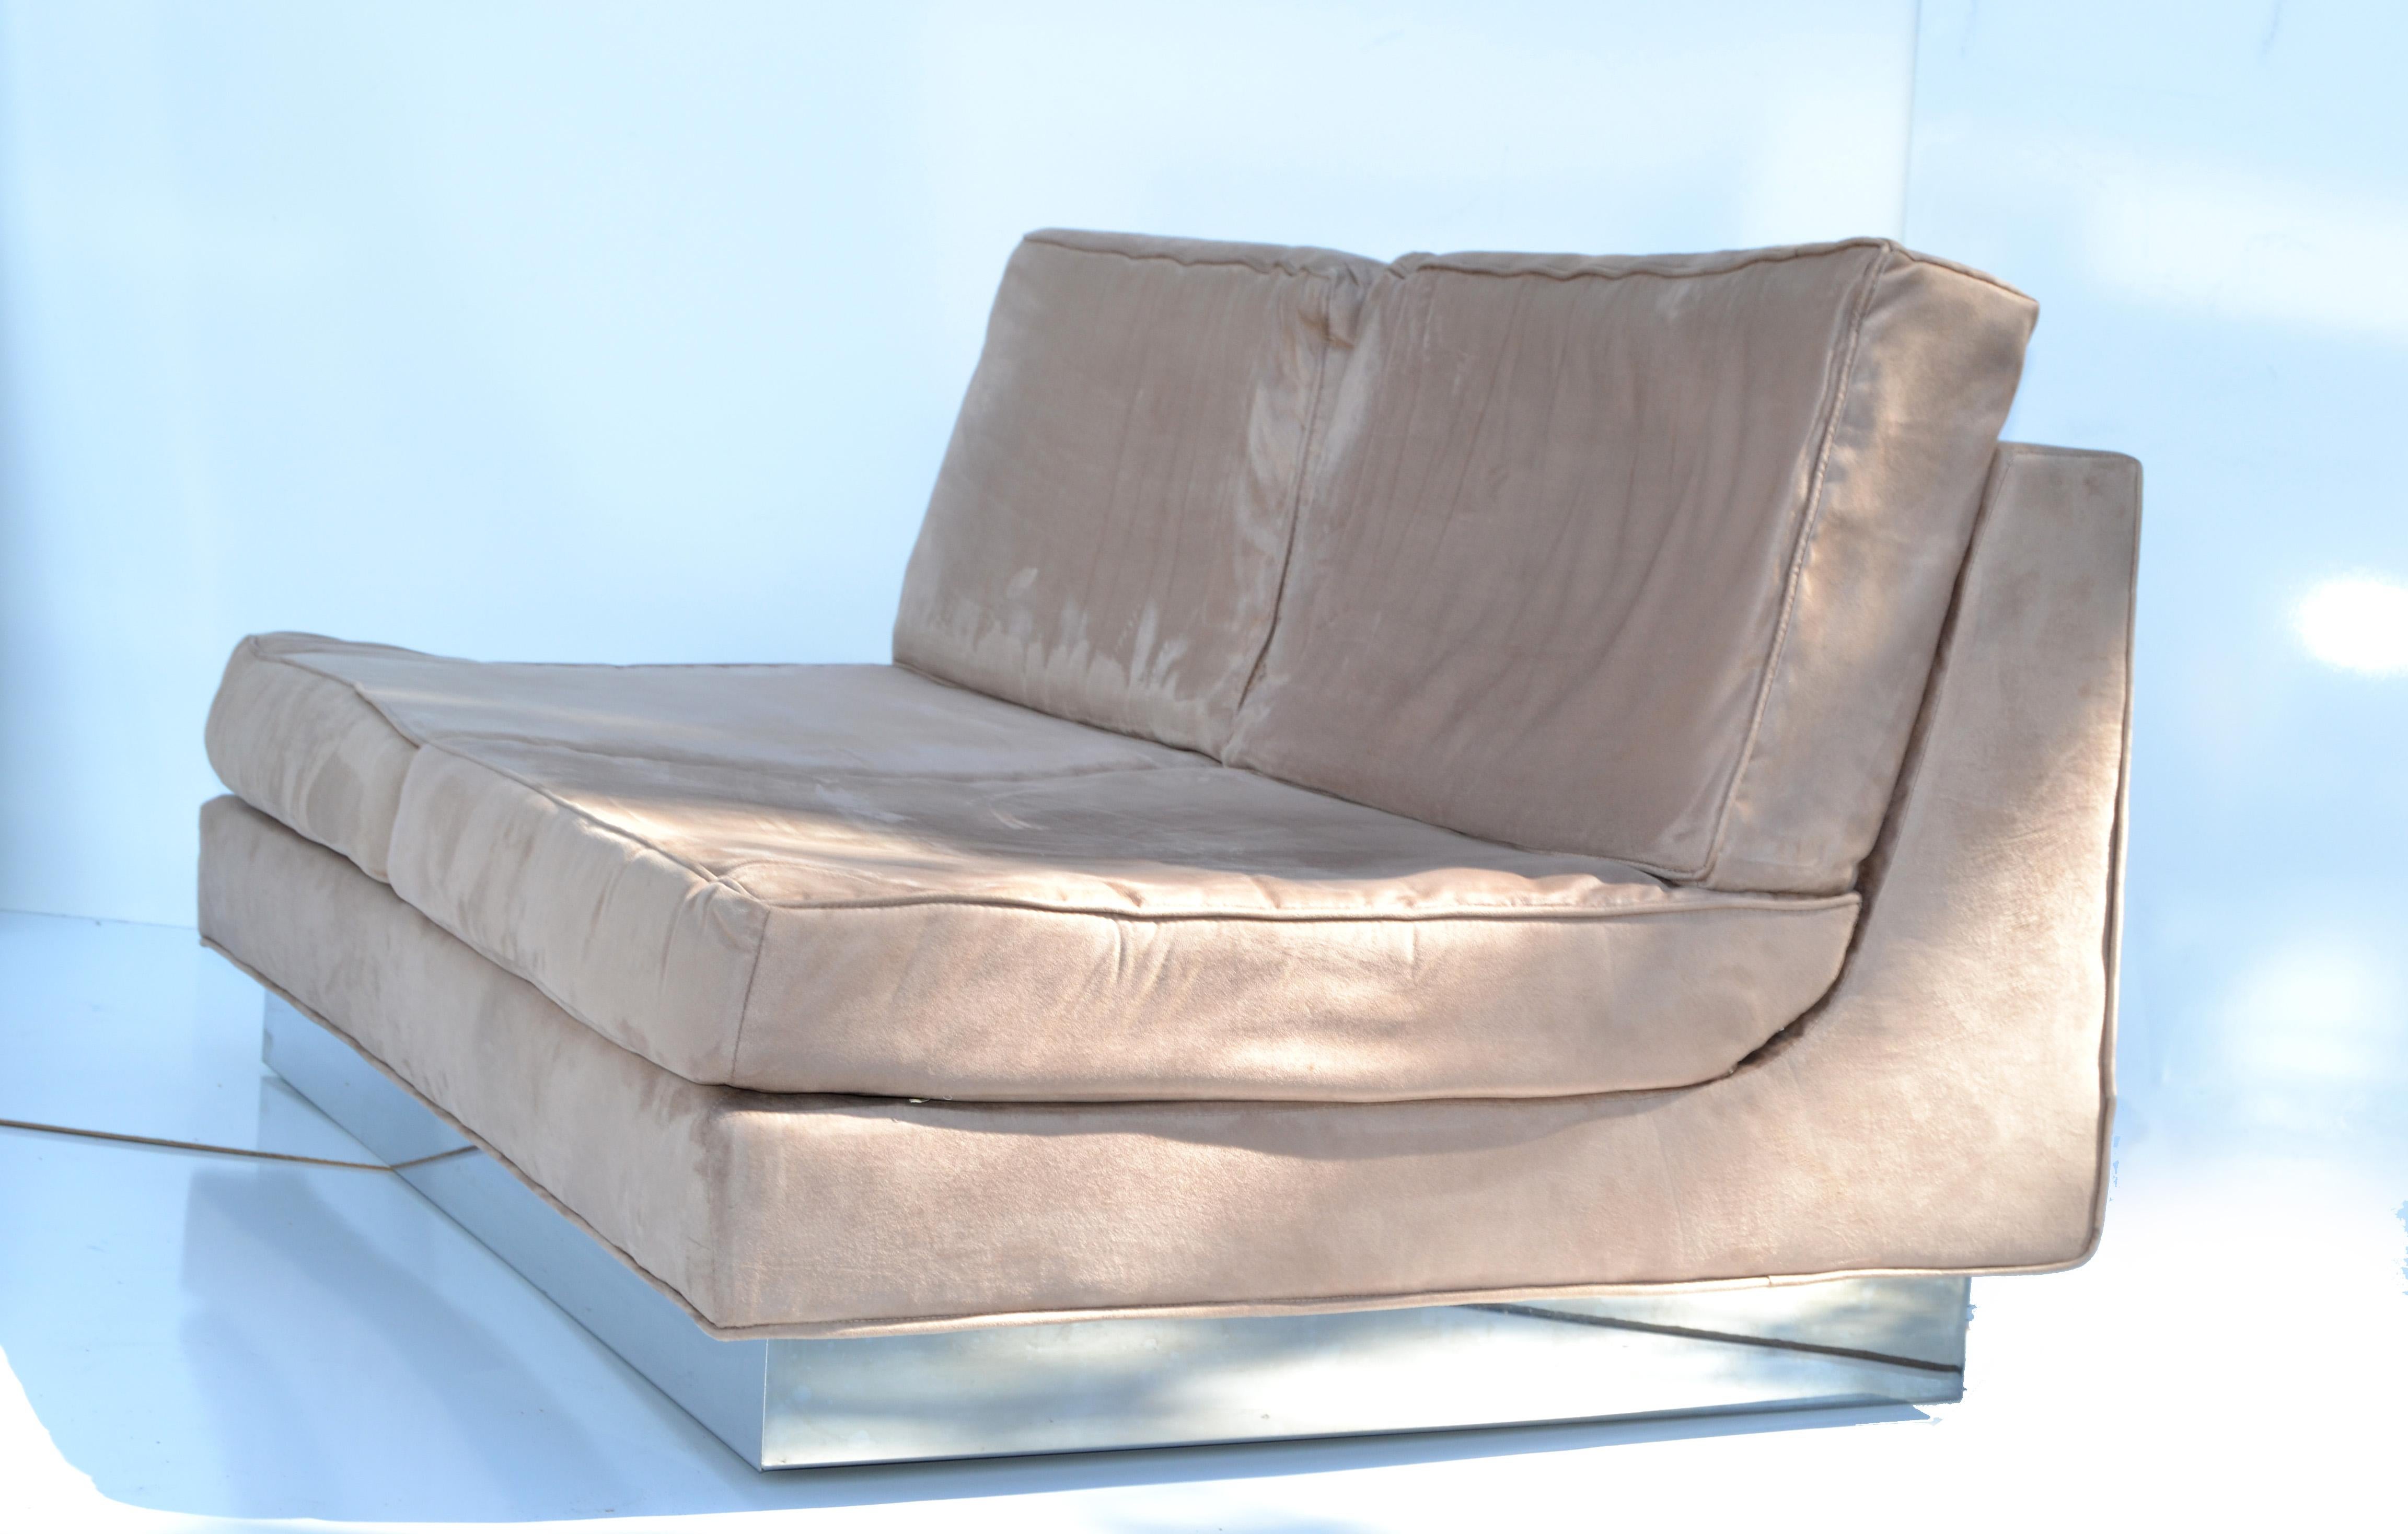 Chrome Jacques Charpentier Loveseat & Lounge Chair in Beige Ultrasuede 1970 France For Sale